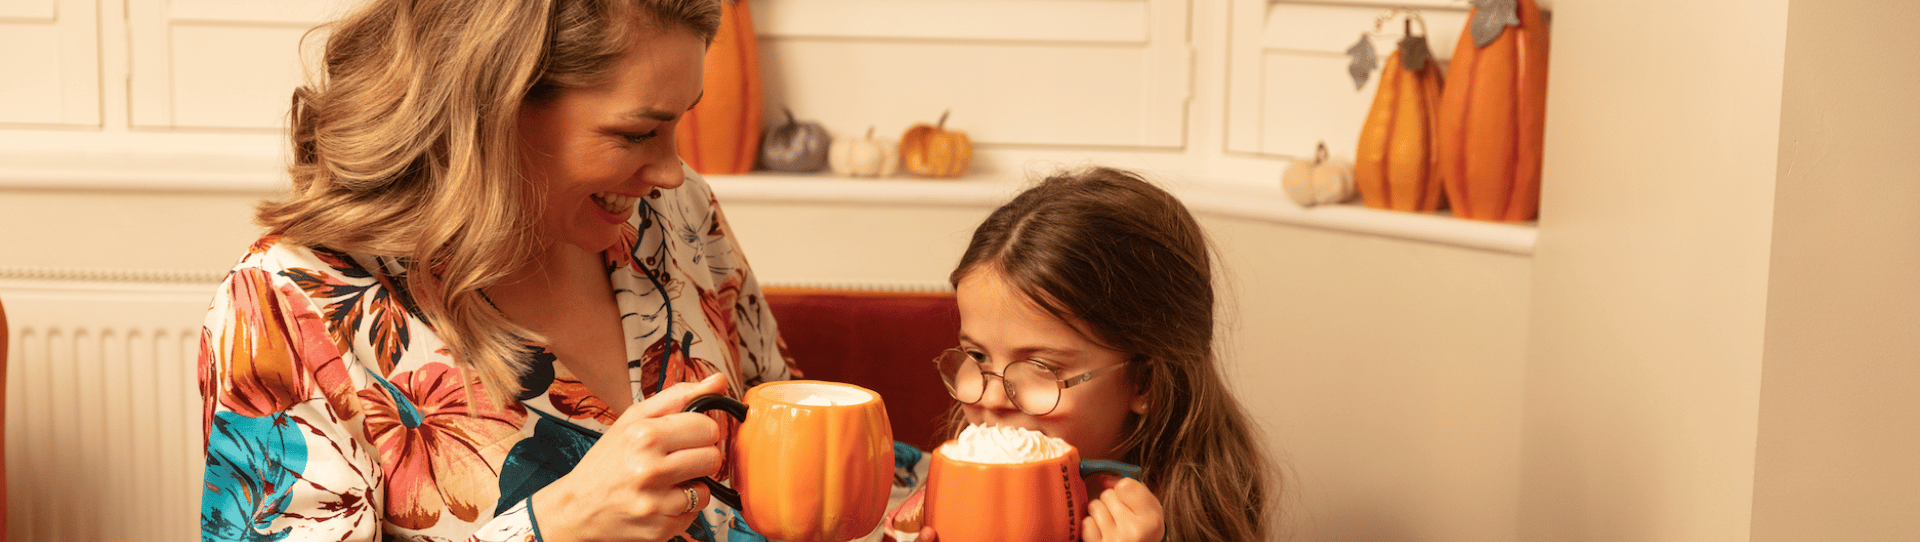 Pumpkins and Pyjamas: Never Leave the House Again With This Homemade Pumpkin Spice Latte Recipe